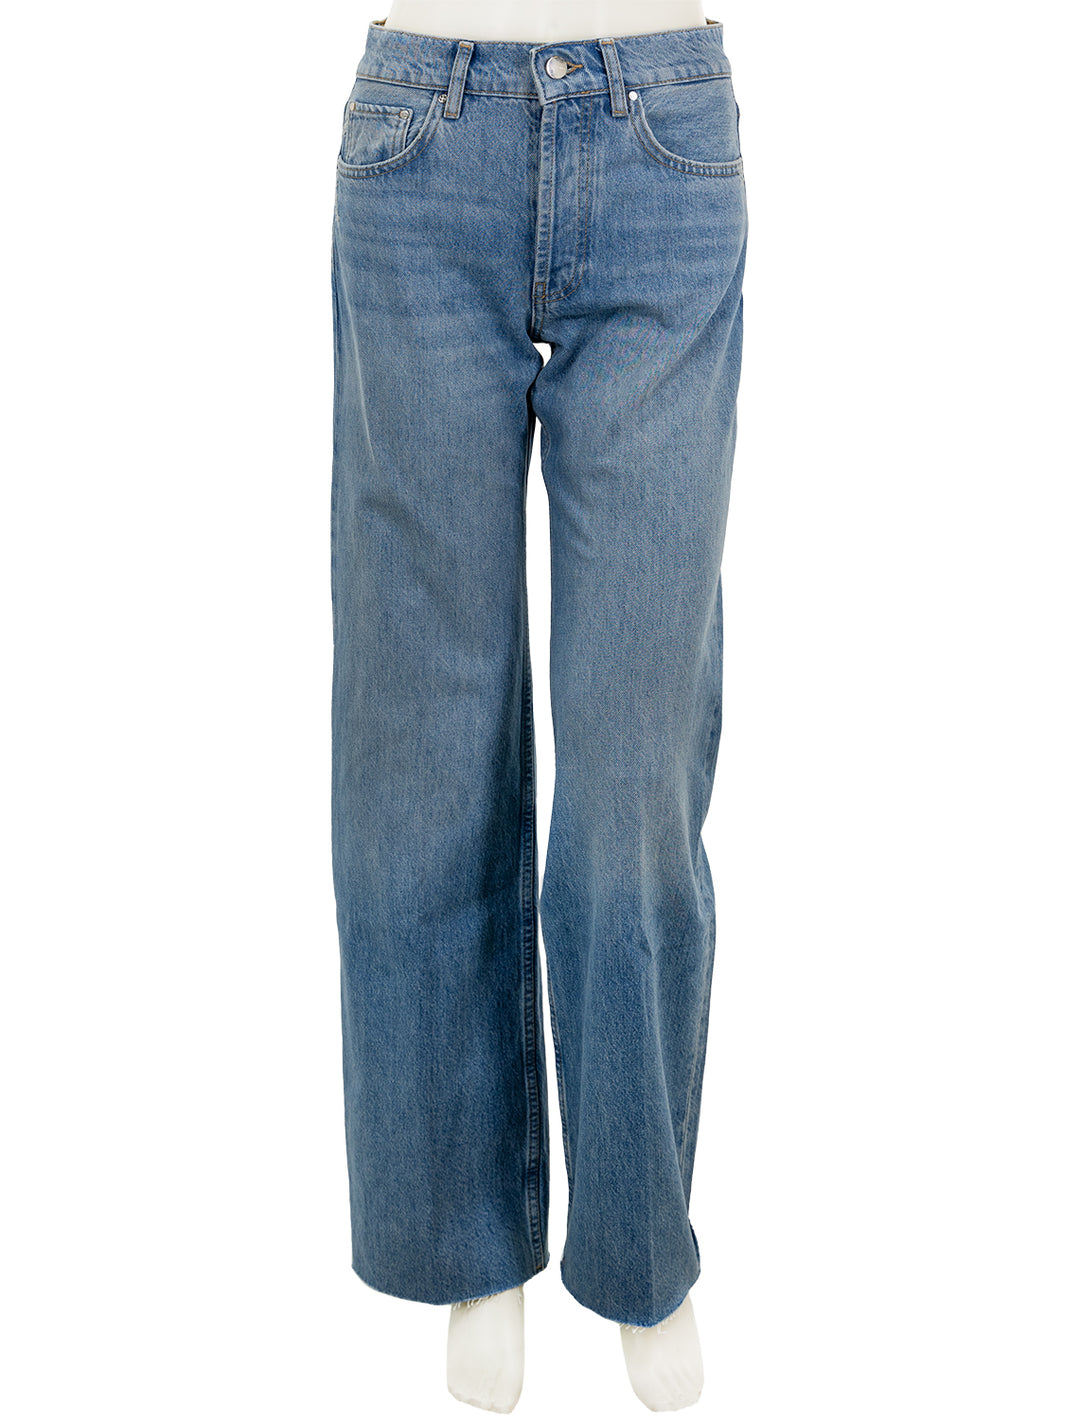 Front view of Anine Bing's hugh jean in panama blue.